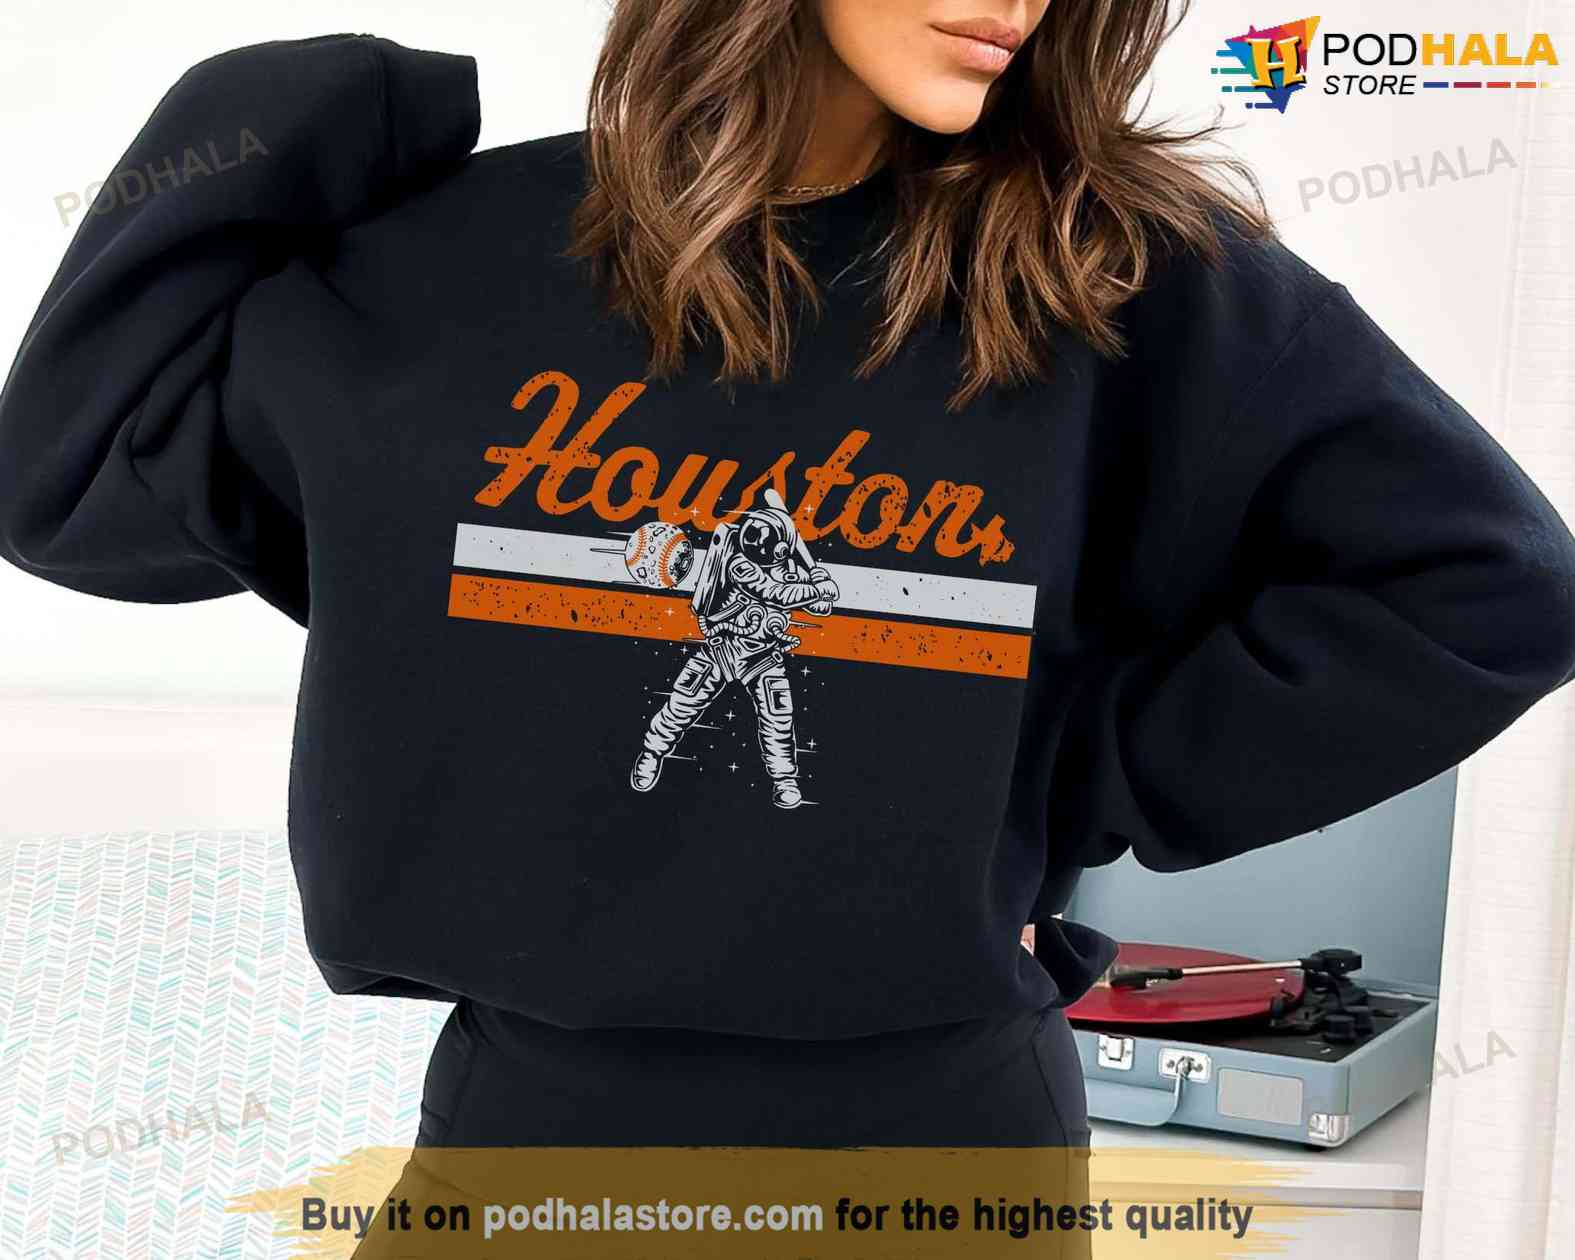 astros world series youth hoodie